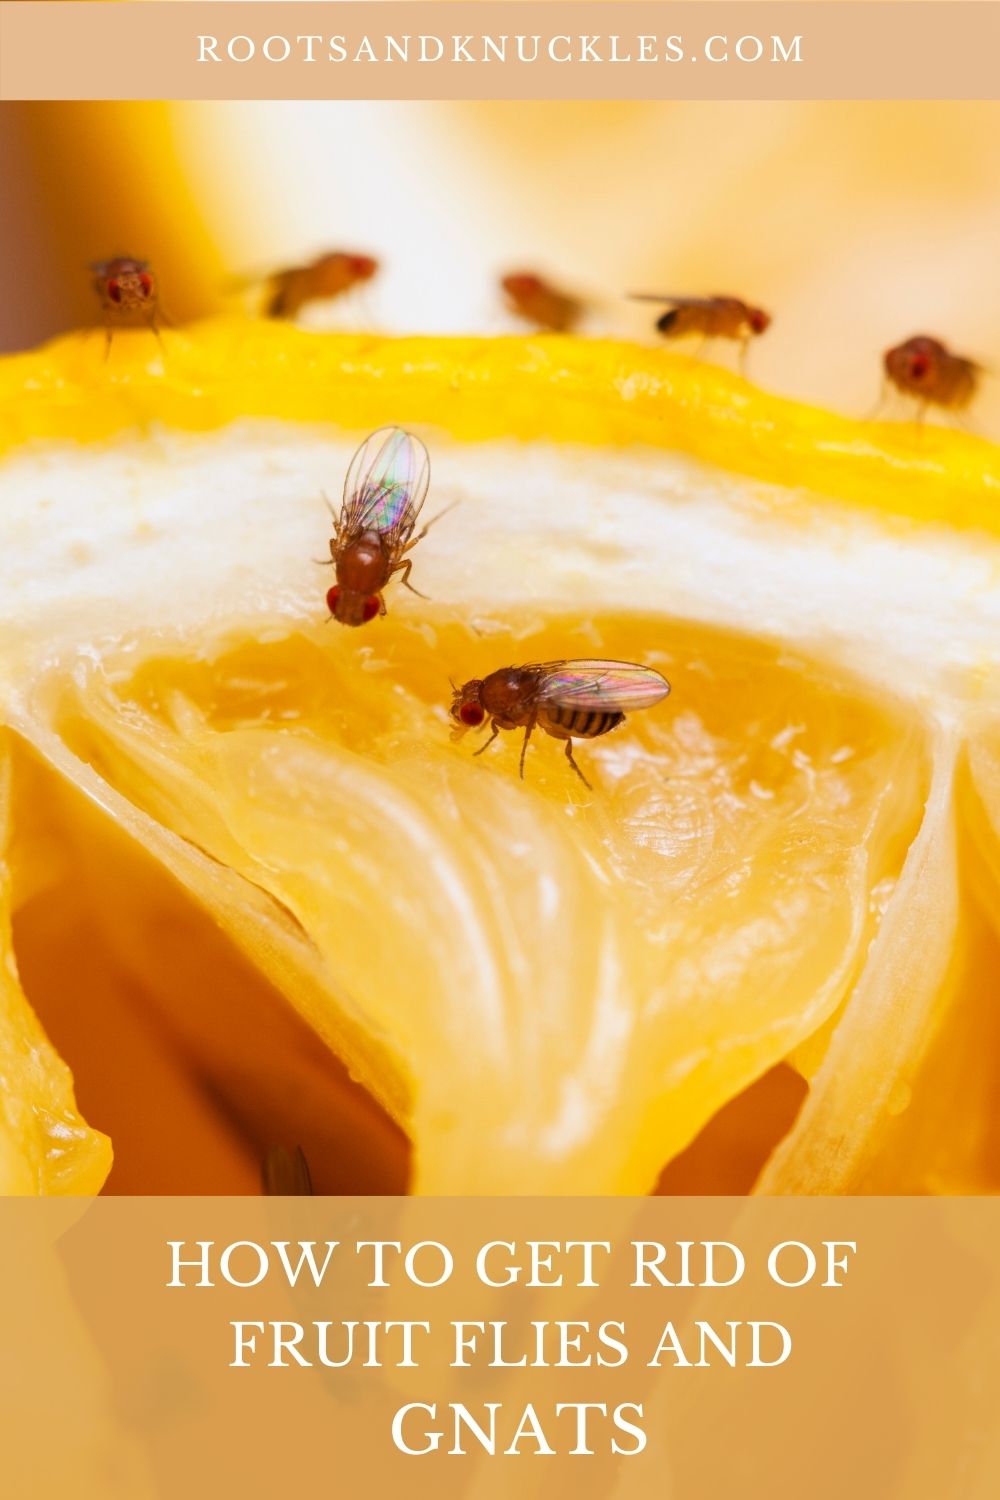 how to get rid of fruit flies inside the drain